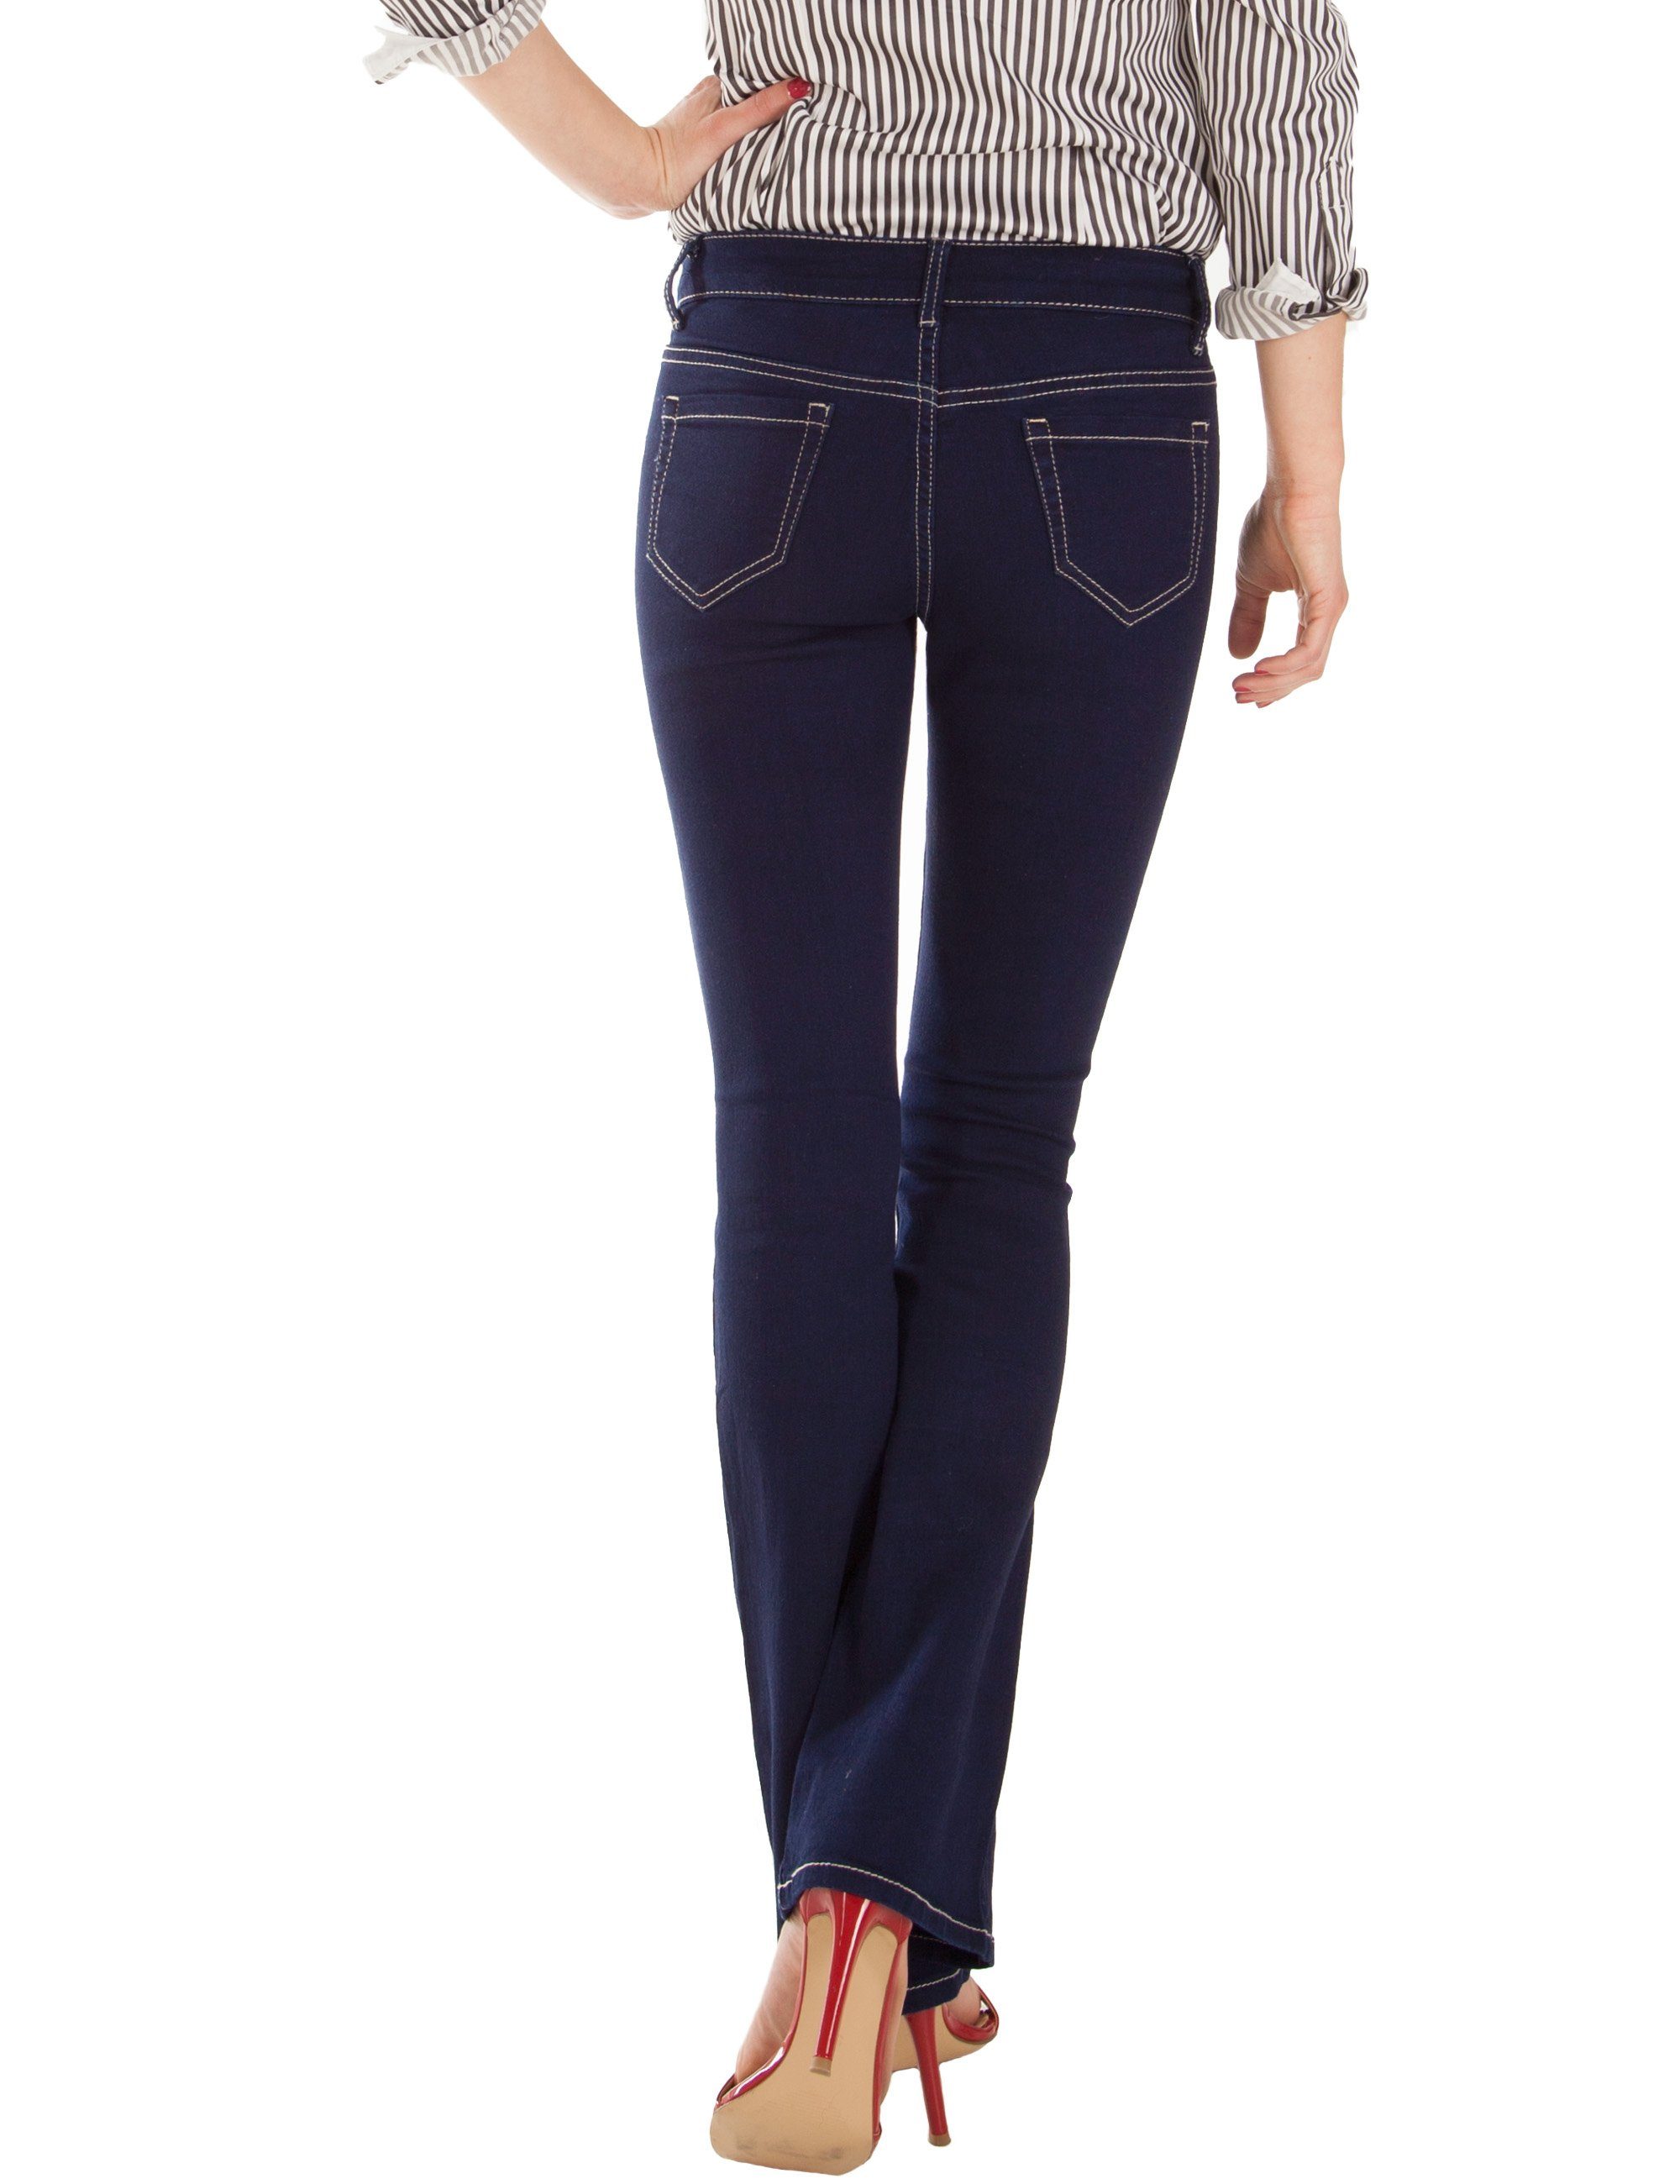 Normal 5-Pocket-Style, Waist Blau Stretch, Bootcut-Jeans Fraternel